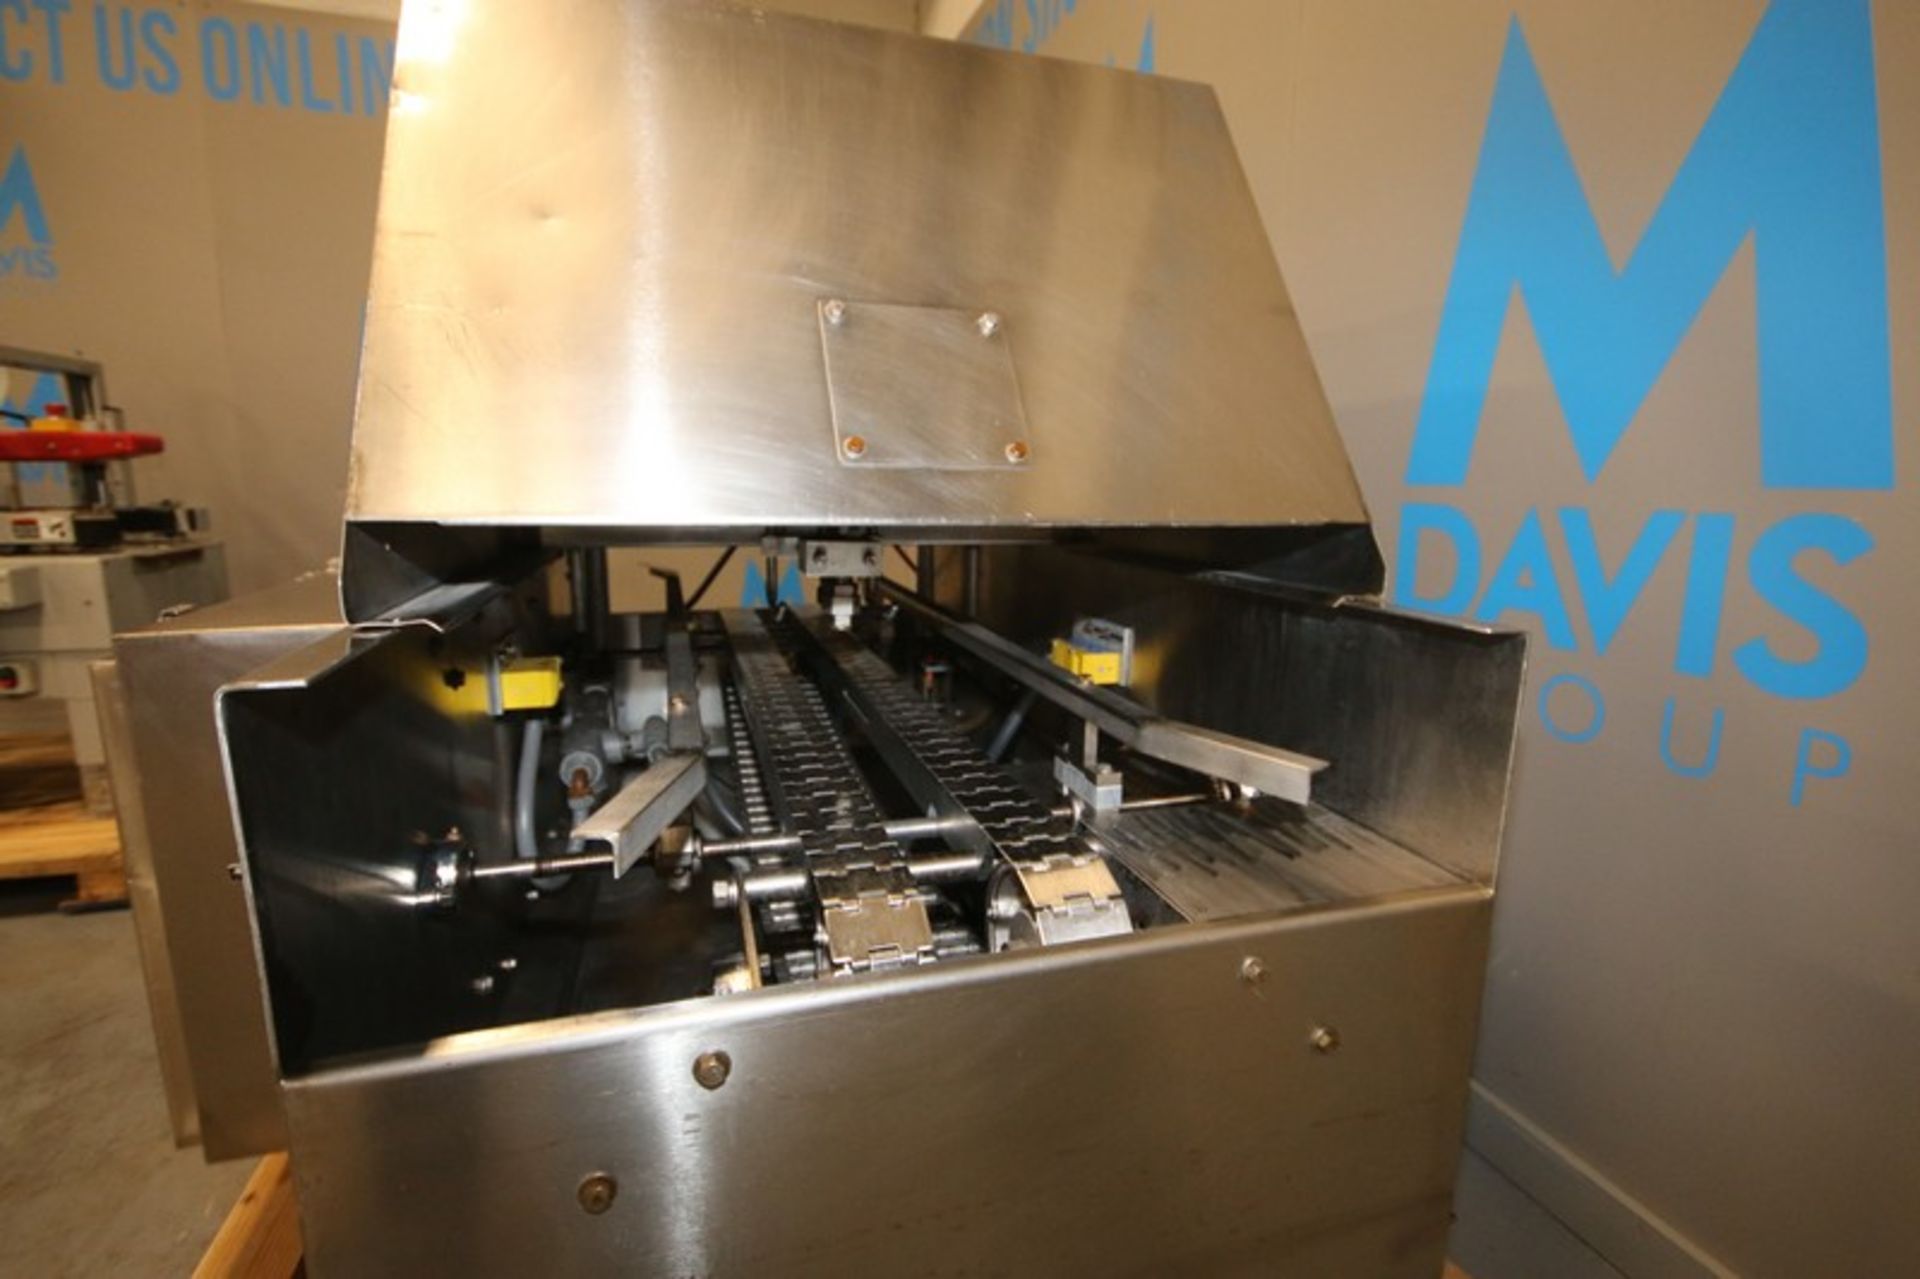 Mallet S/S Bread Pan Oiler, M/N 2001A, S/N 243-456, 460 Volts, 3 Phase, with Casters (INV#77729)( - Image 4 of 11